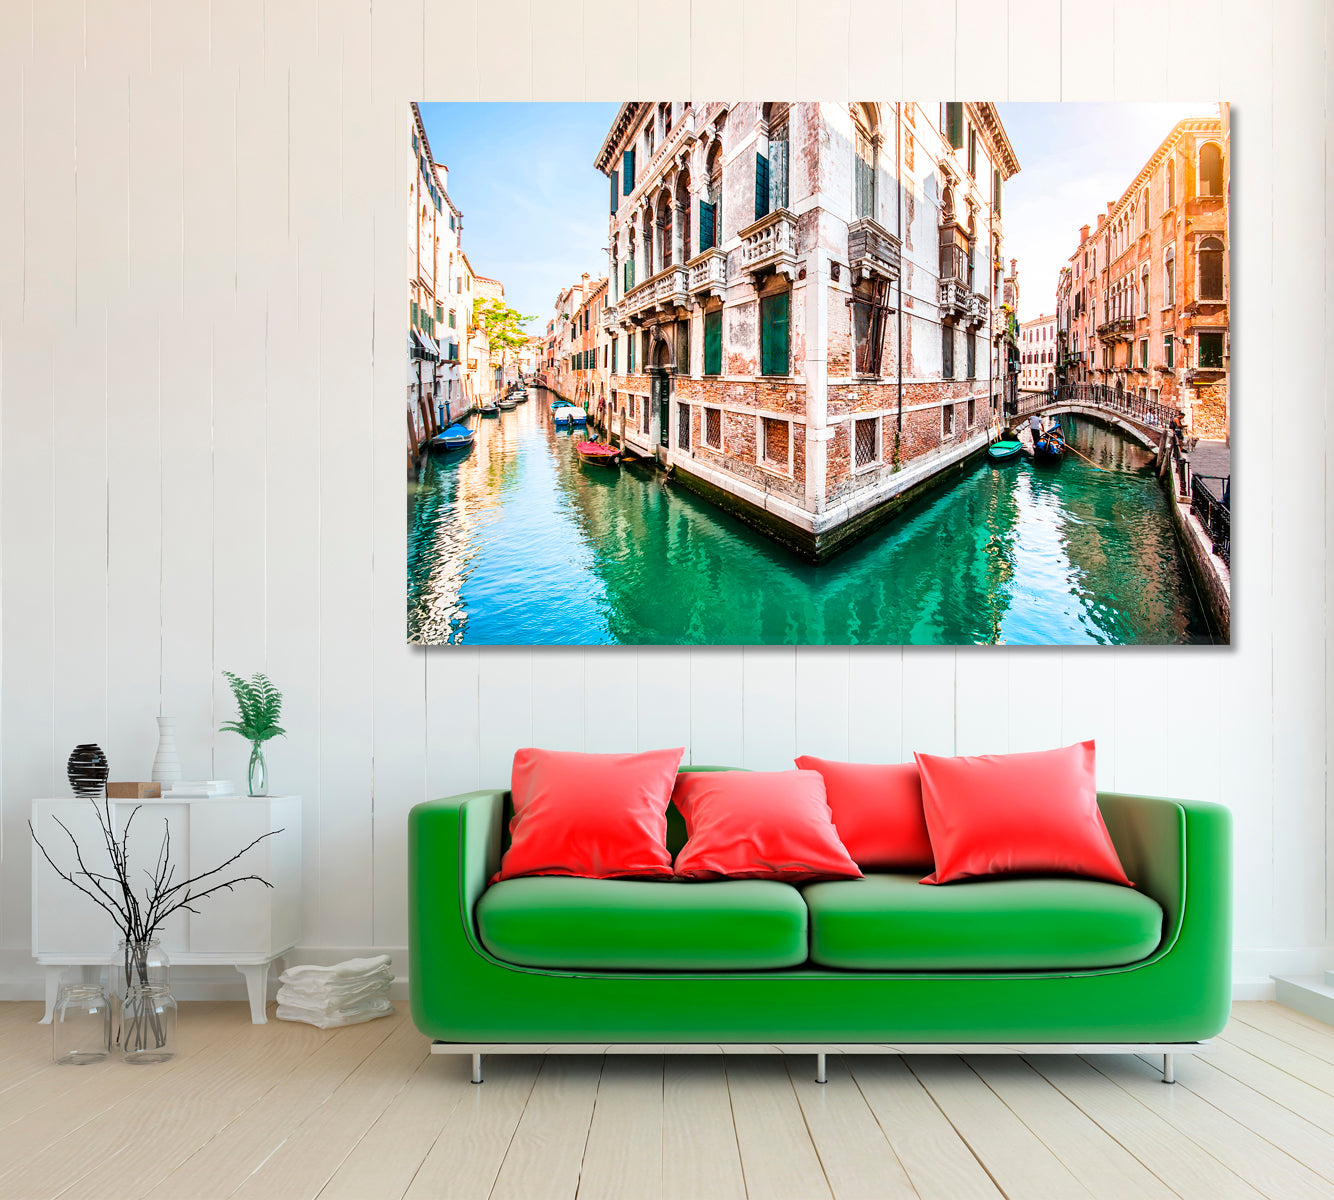 Grand Canal Venice Canvas Print ArtLexy 1 Panel 24"x16" inches 